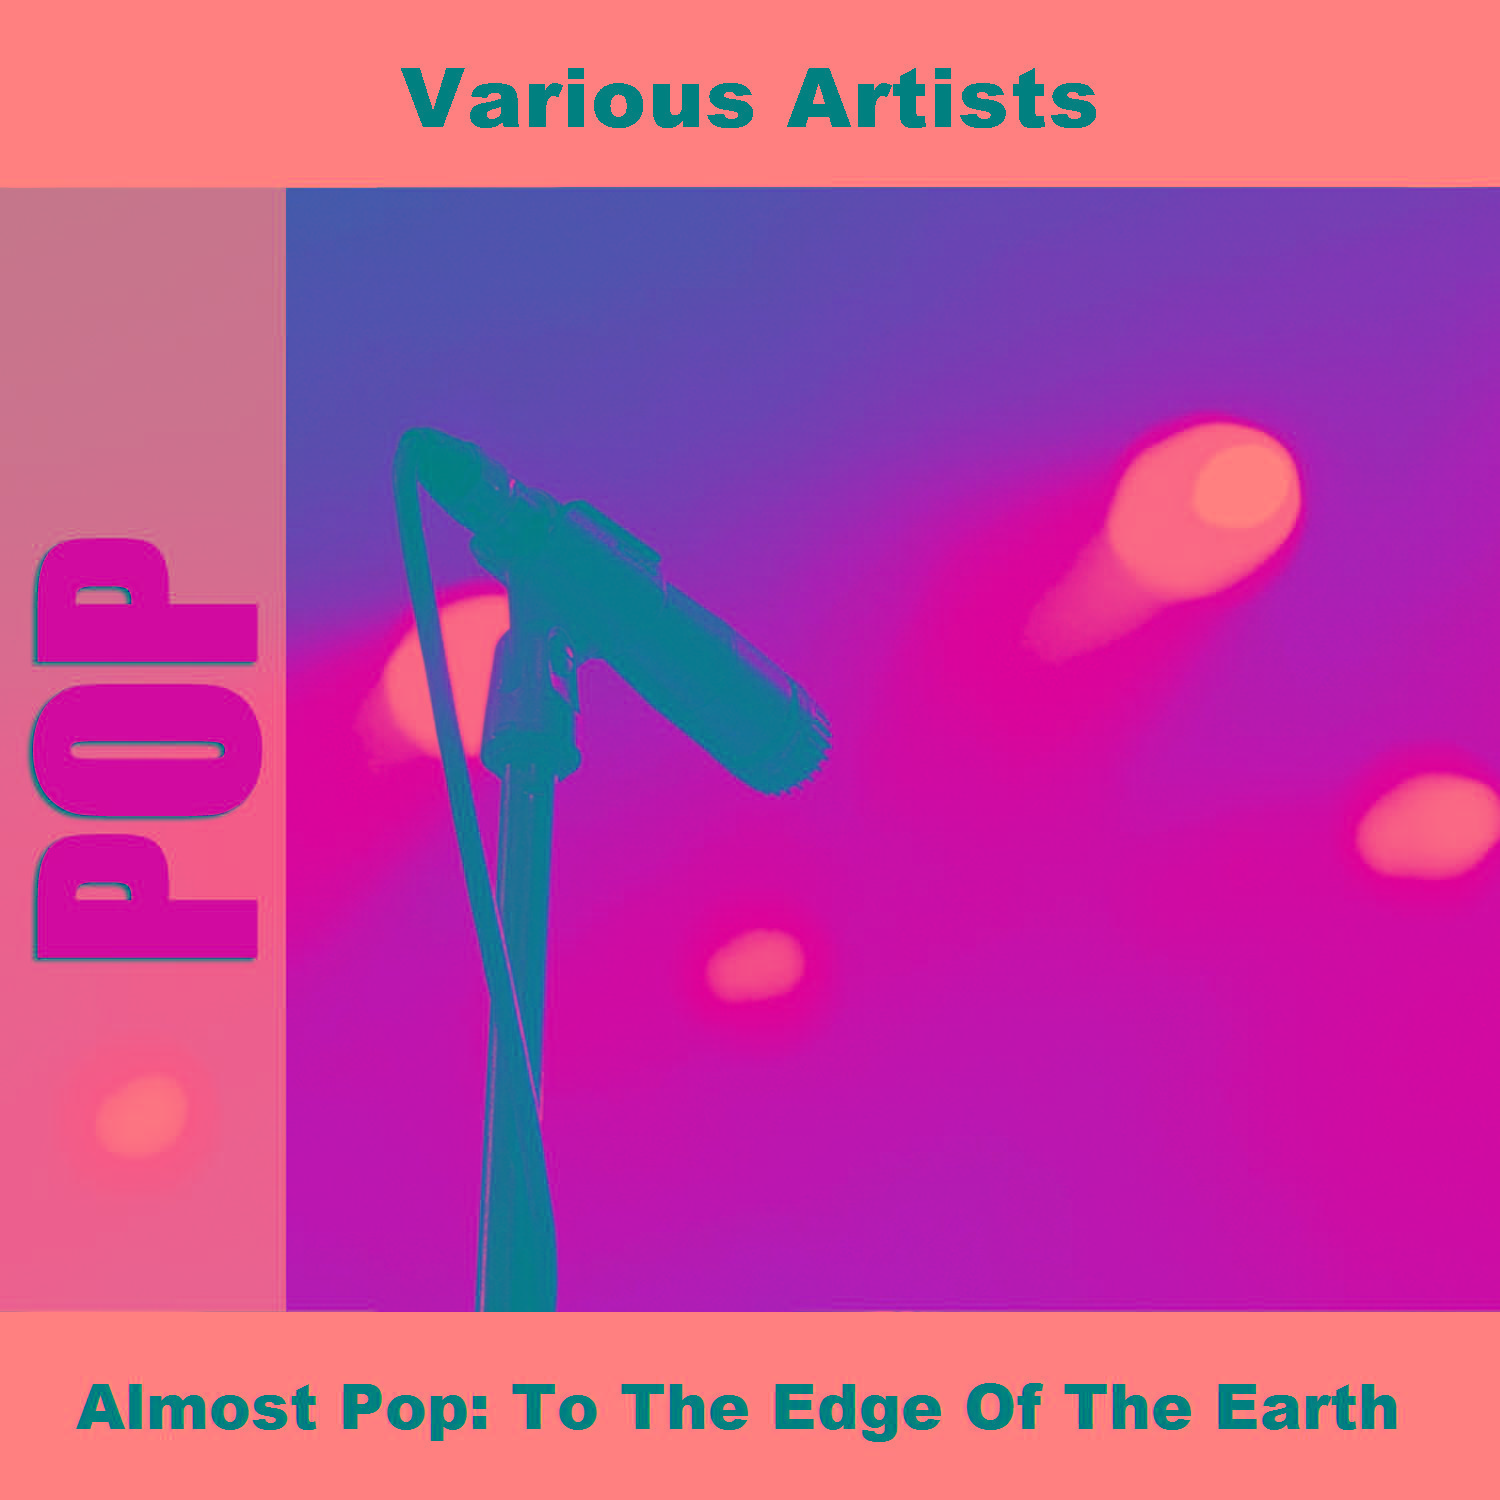 Almost Pop: To The Edge Of The Earth